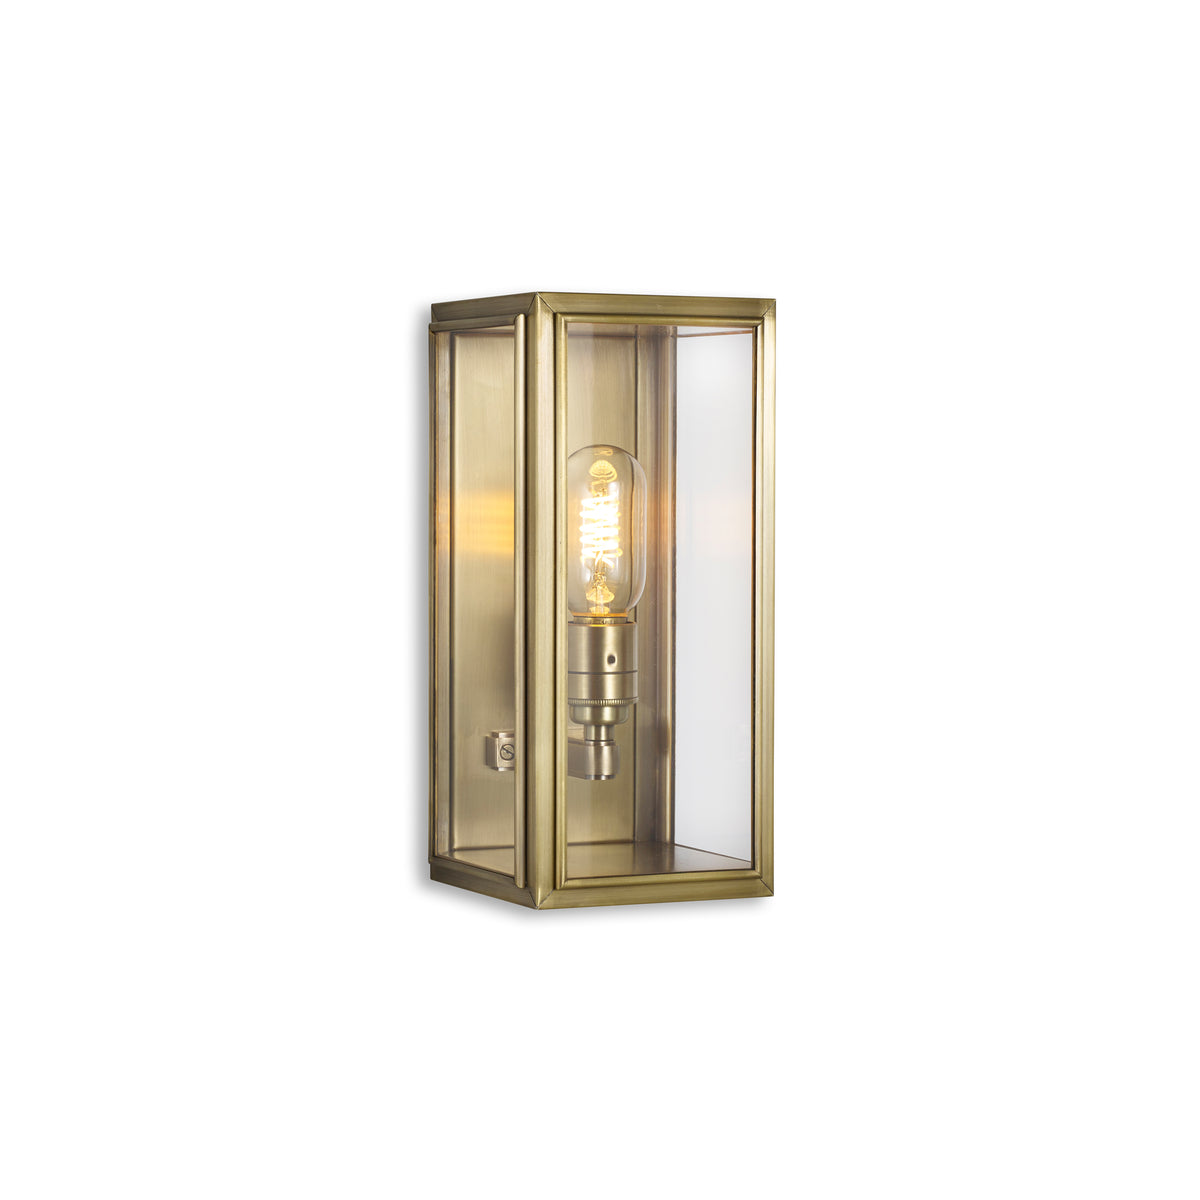 J Adams Ash Small Wall Lantern box light in antique brass with clear glass